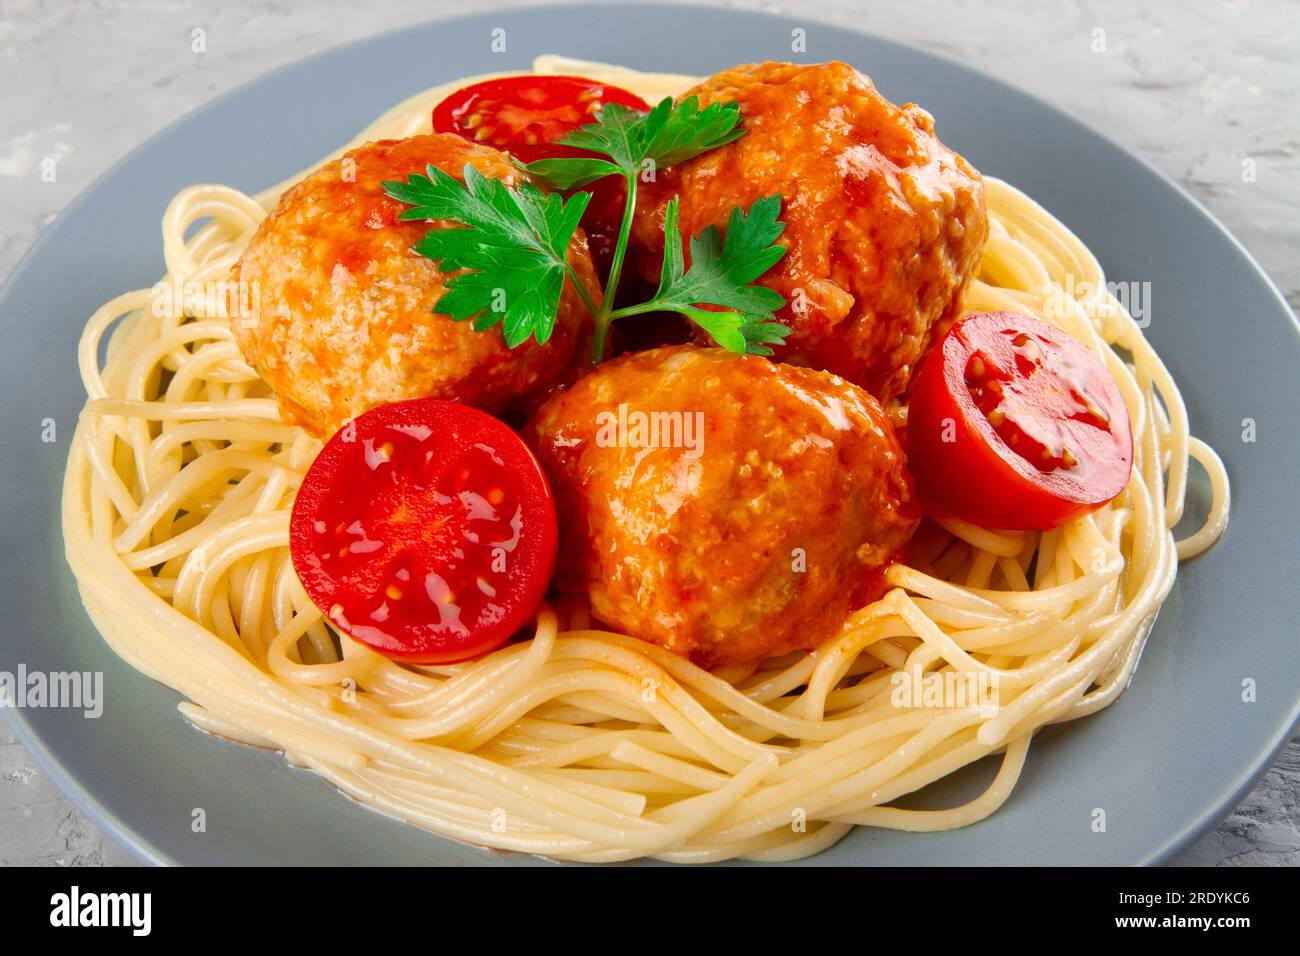 Delicious meatballs made from turkey in spicy tomato sauce served with pasta, close-up Stock Photo